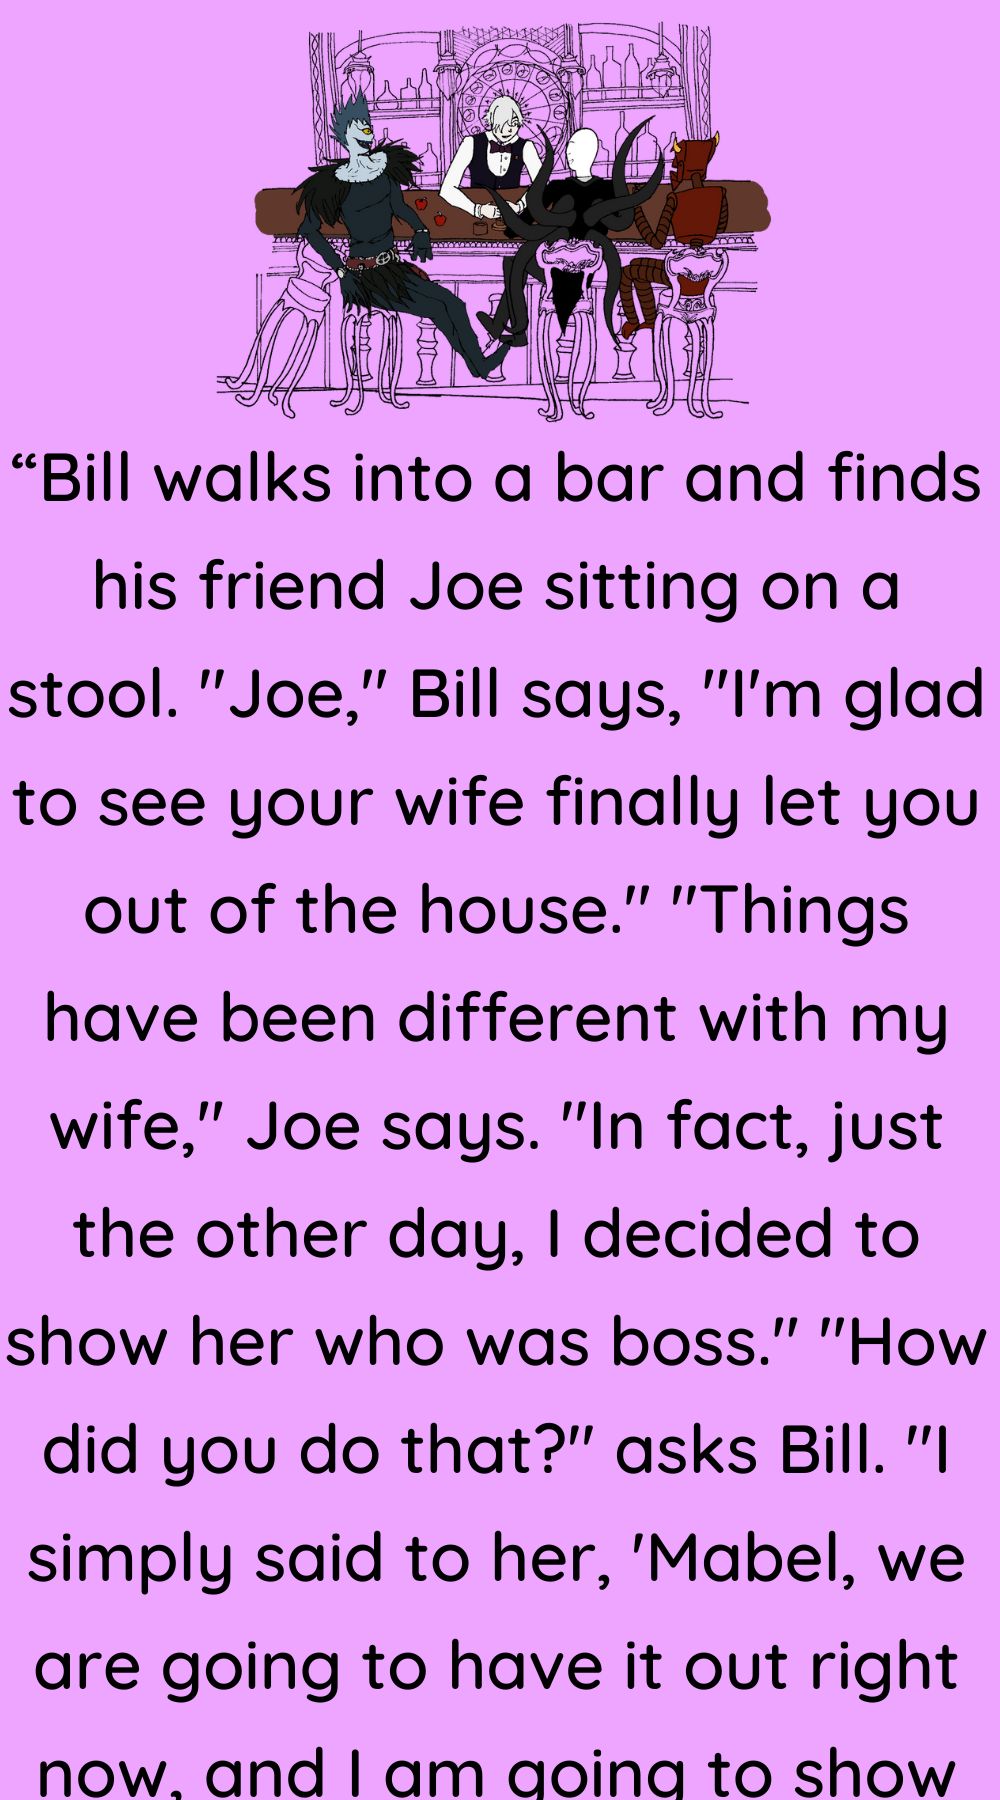 Bill walks into a bar and finds